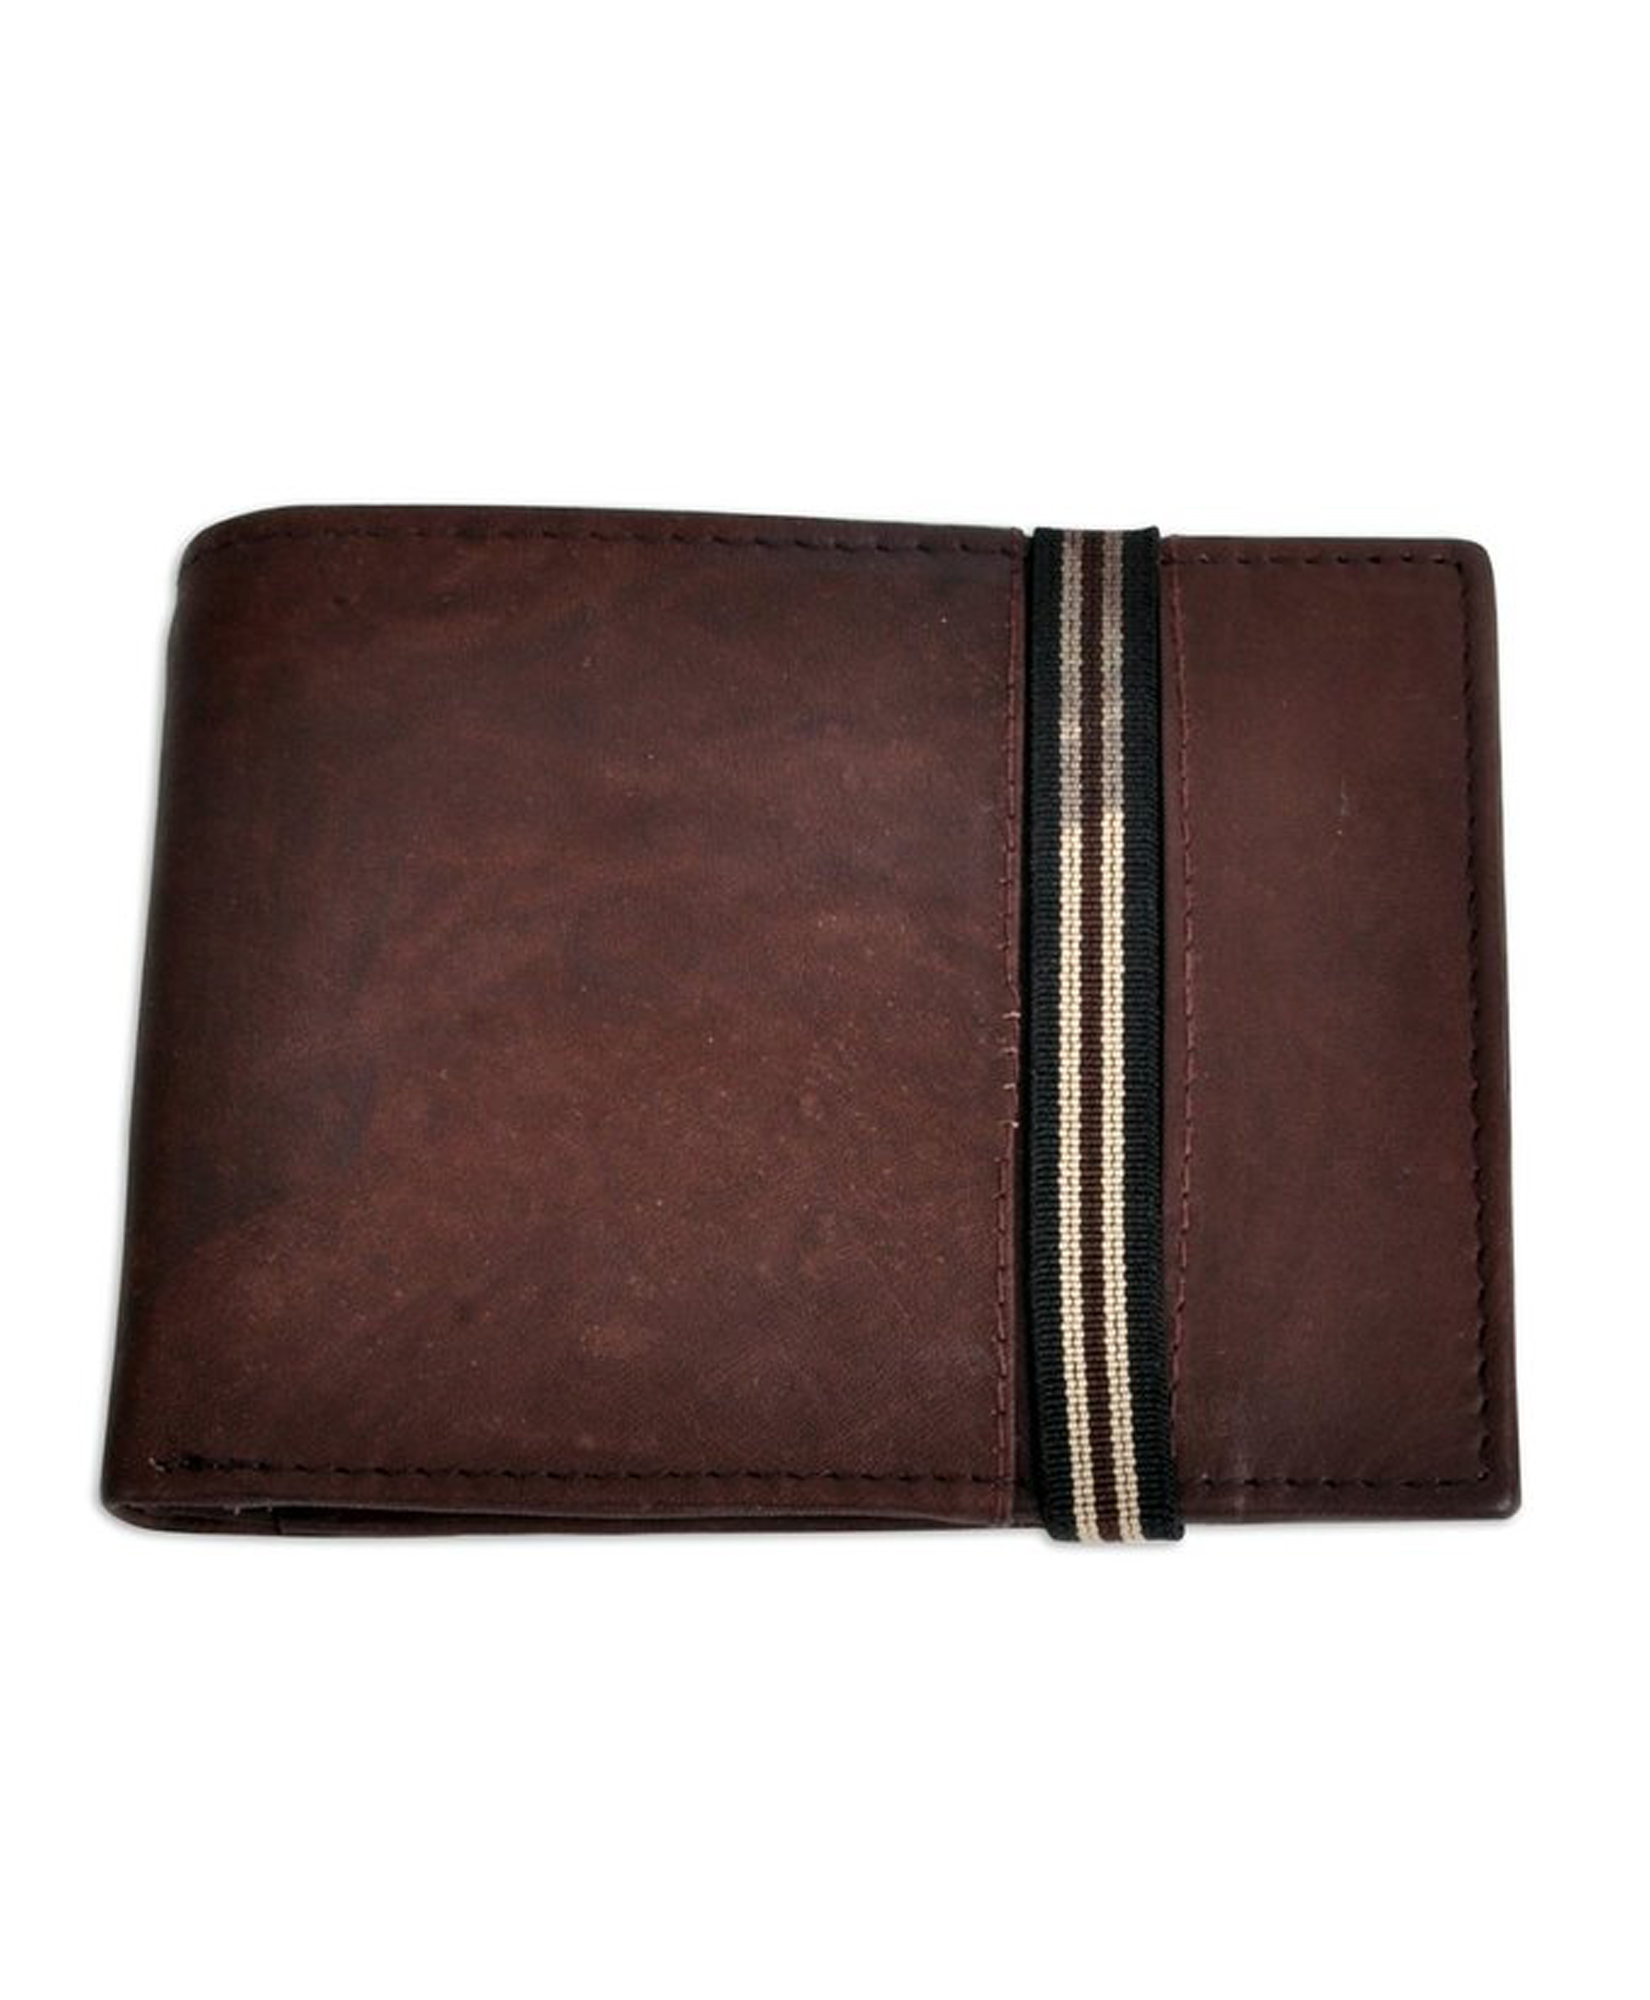 Selini NY Men's Bi-Fold Genuine Leather Wallet with Elastic Band ...